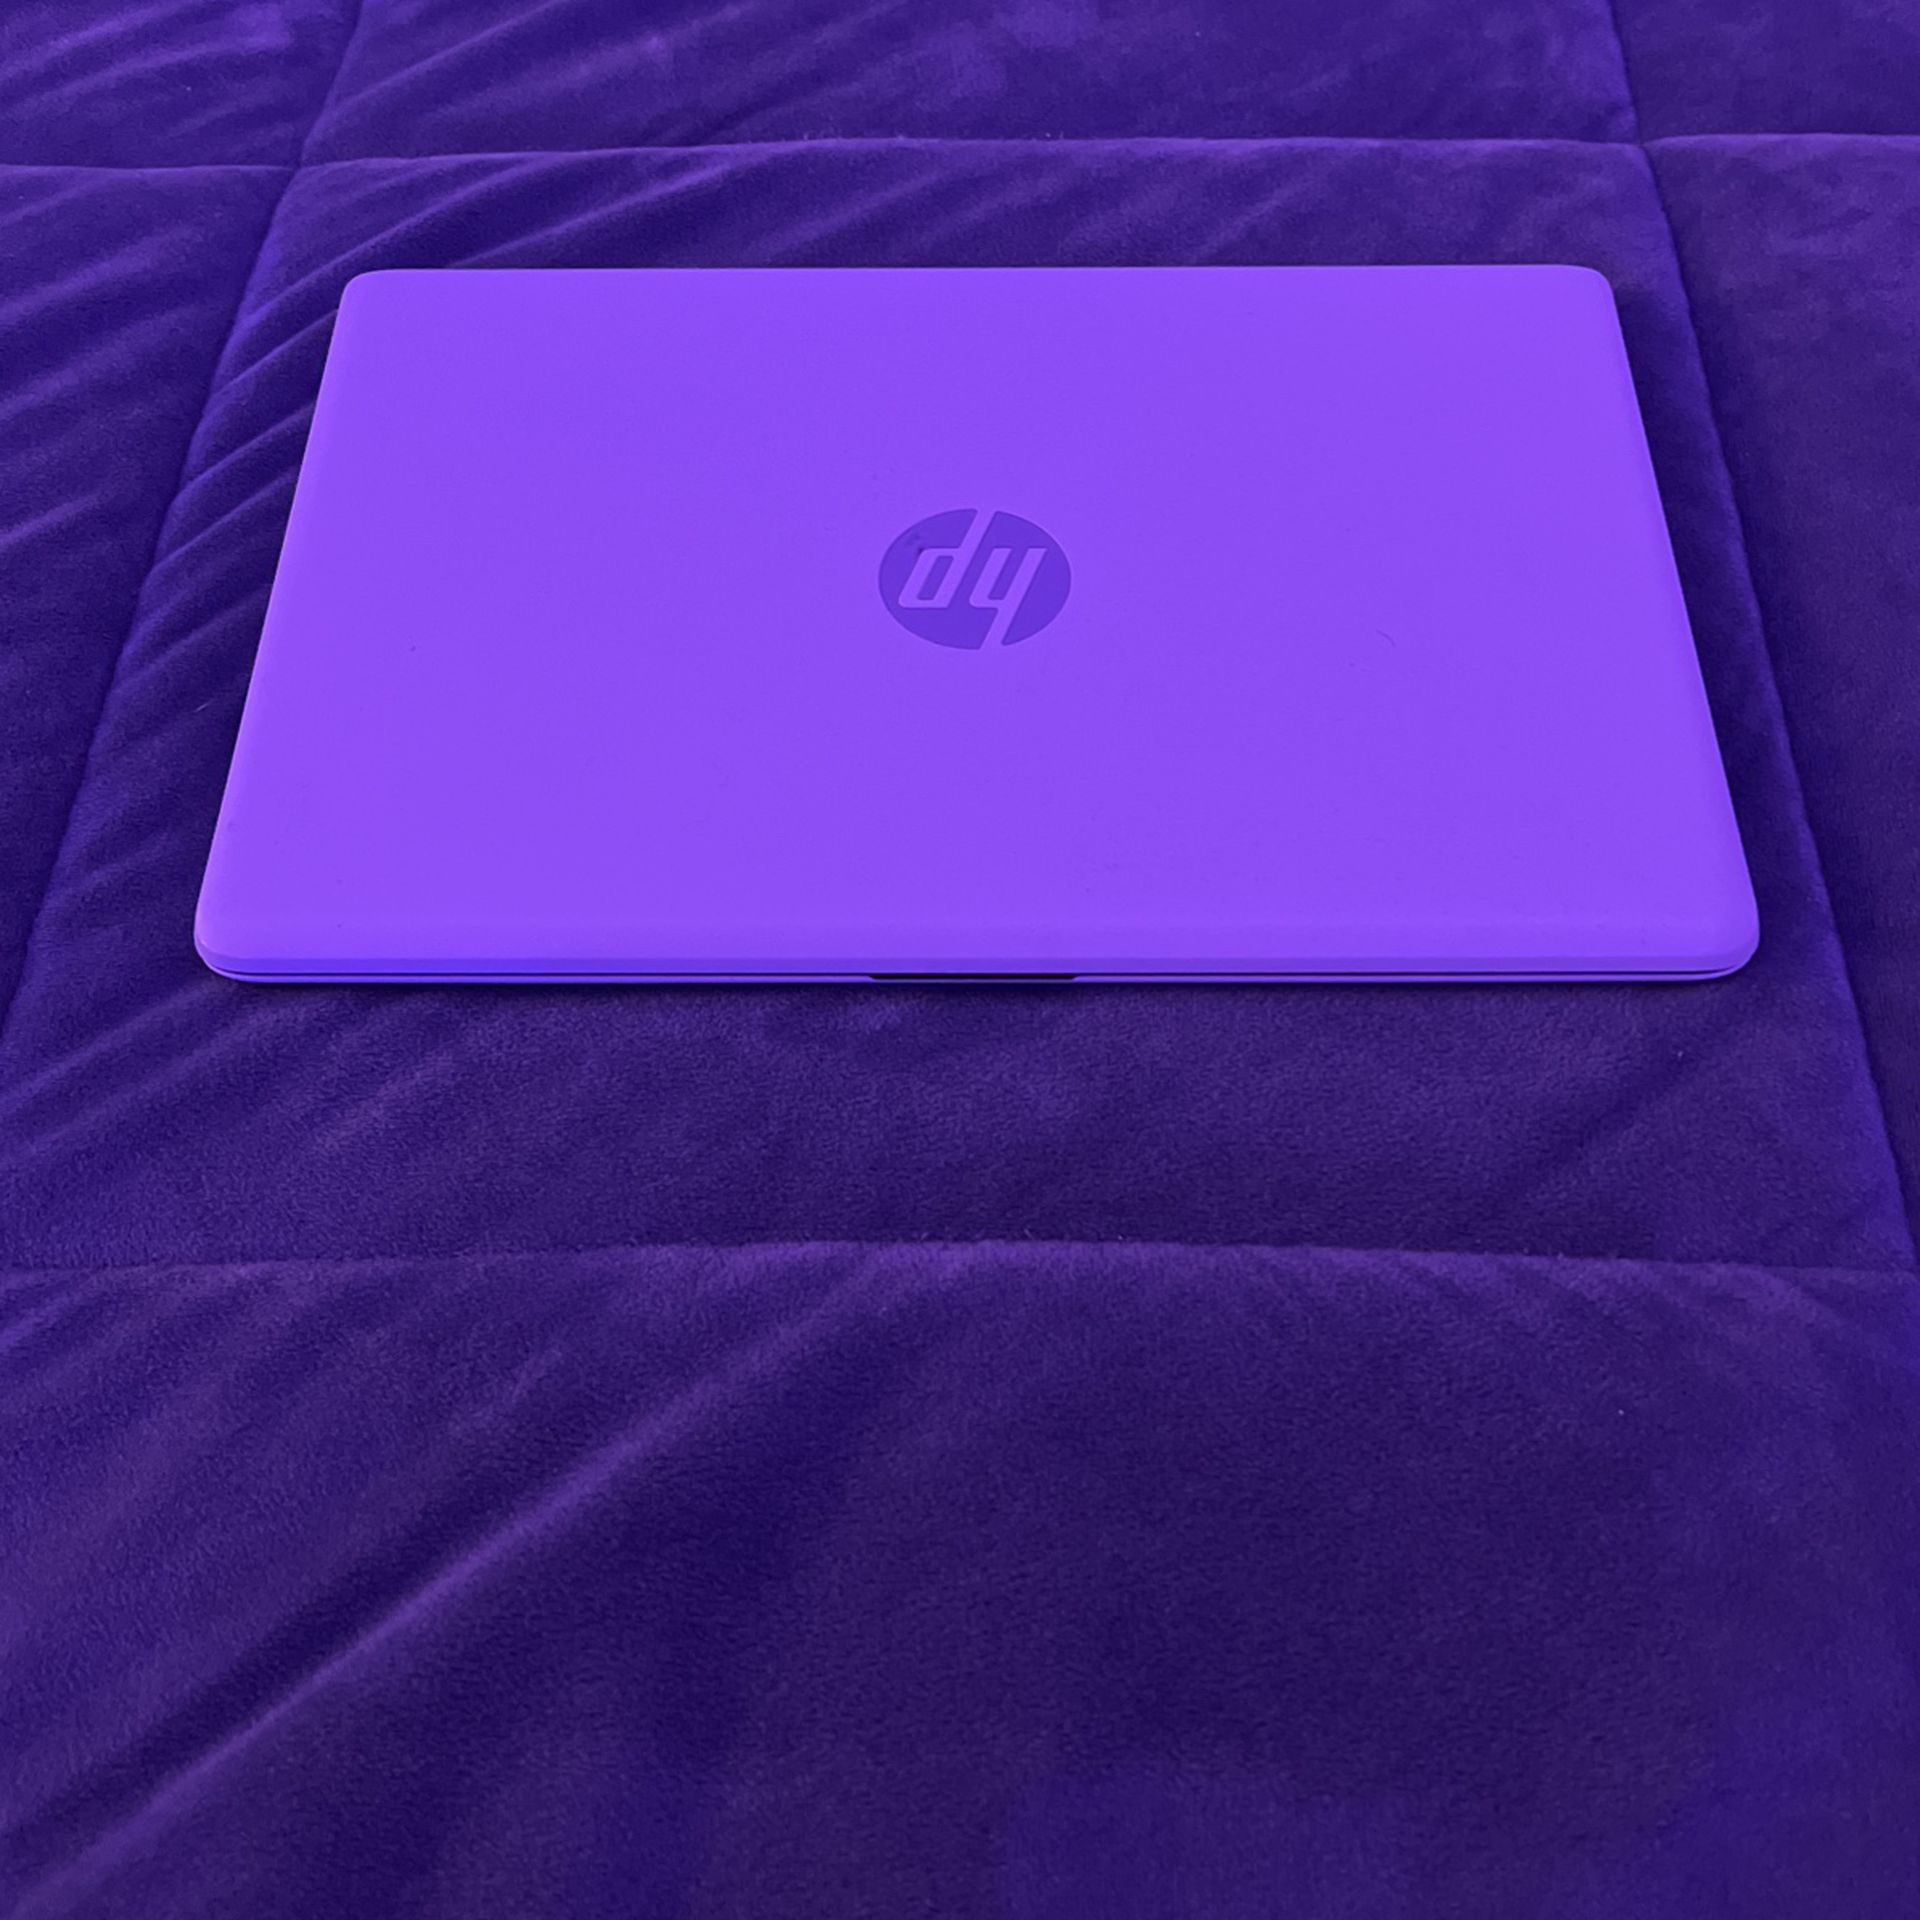 HP LAPTOP - Working & In Like New Condition